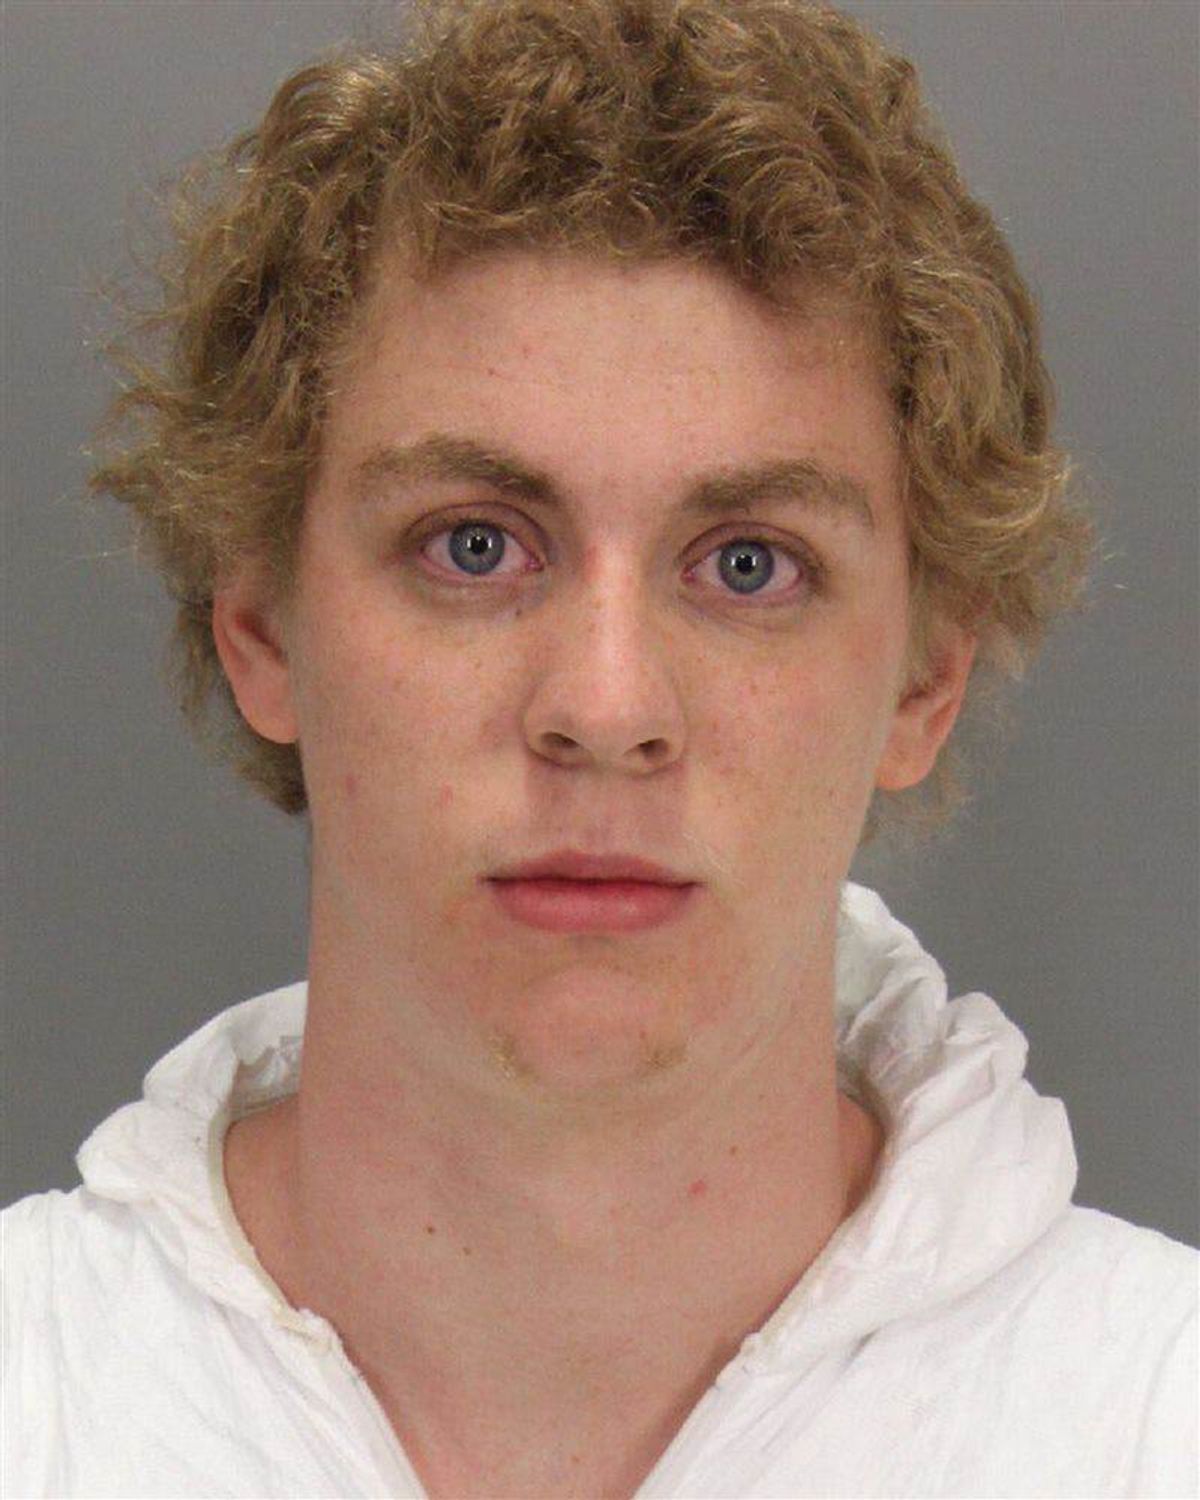 Stanford Rapist Brock Turner to be Released From Jail